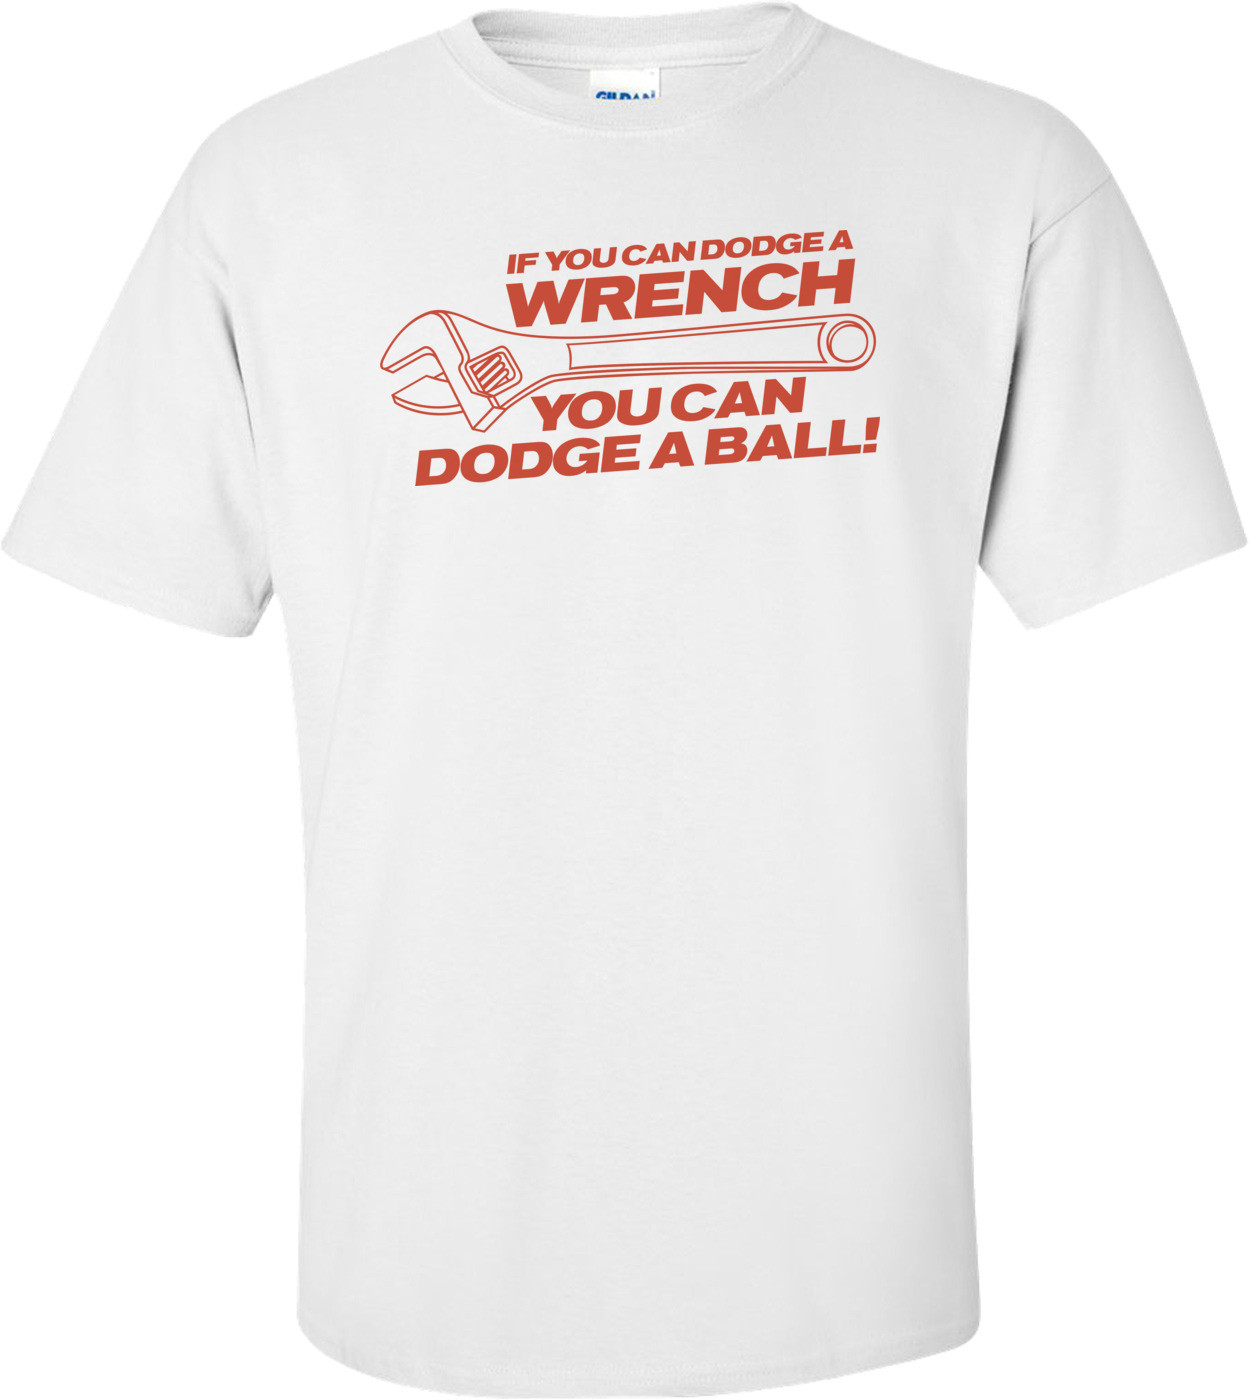 If You Can Dodge A Wrench You Can Dodge A Ball T-shirt